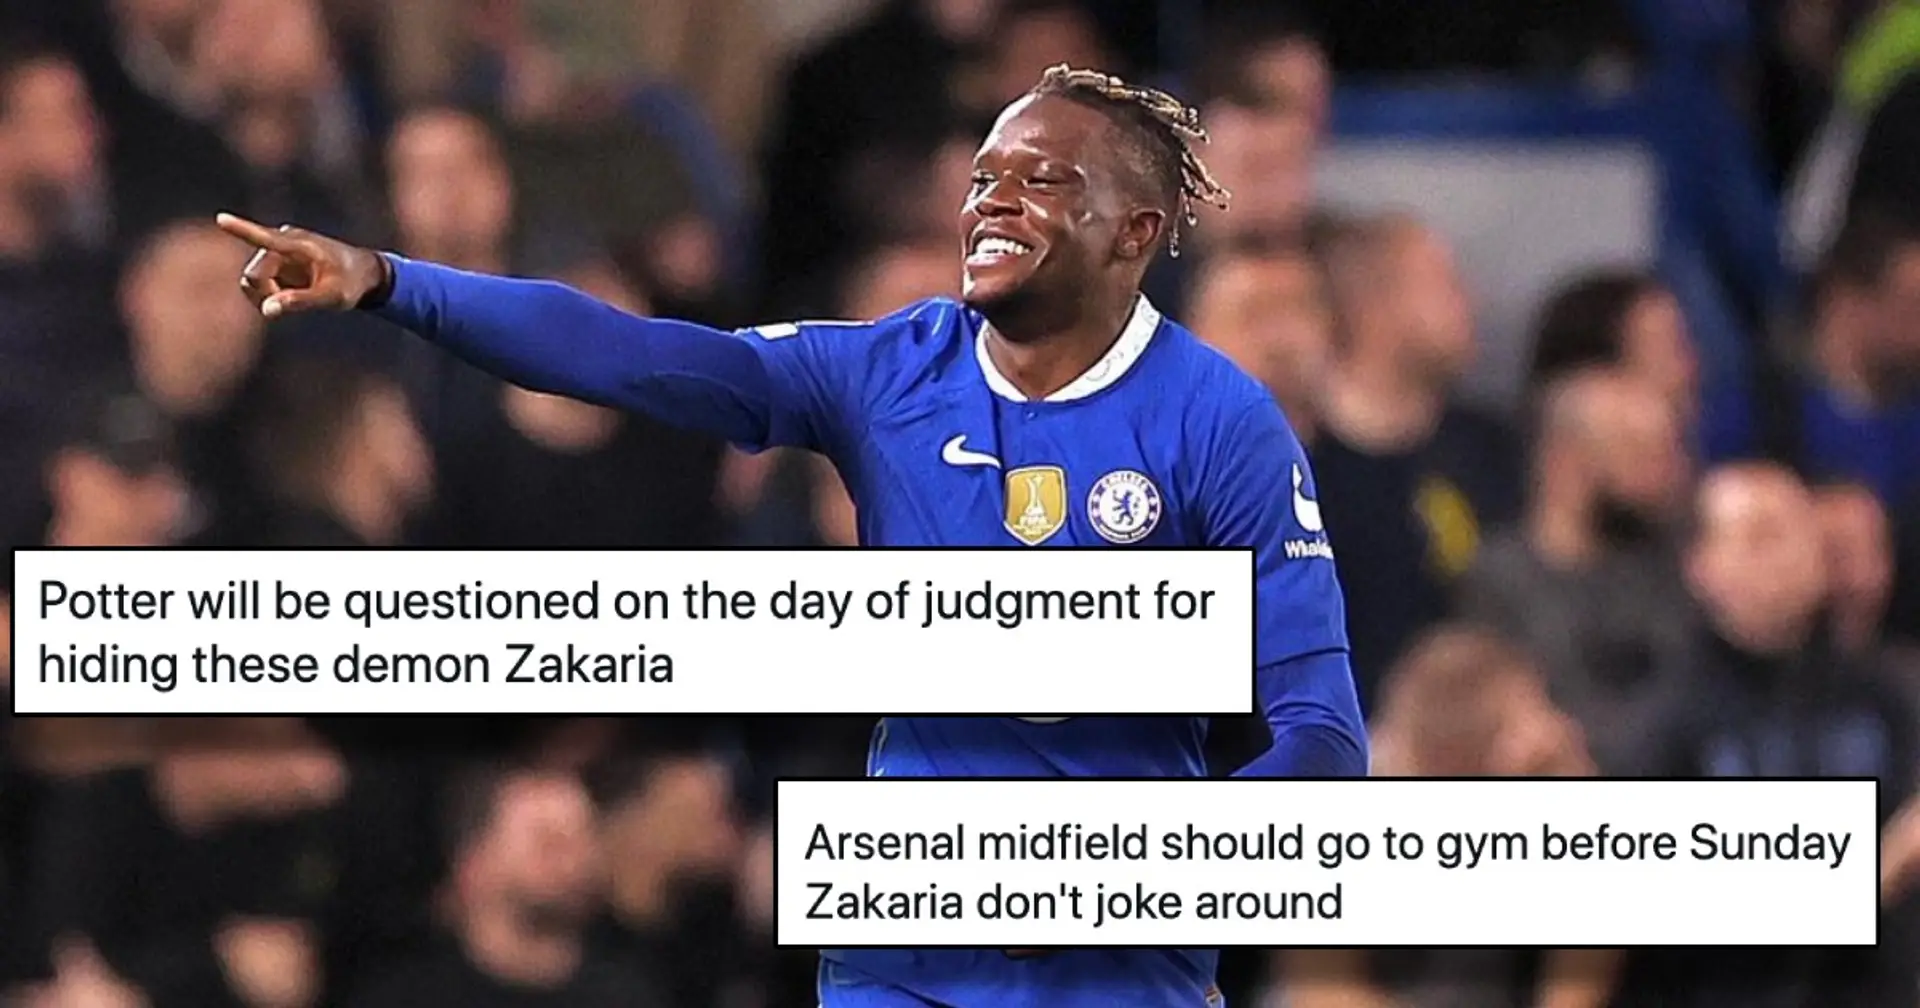 'Just as we suspected, he's a midfield beast': Fans react to Zakaria's memorable Chelsea debut